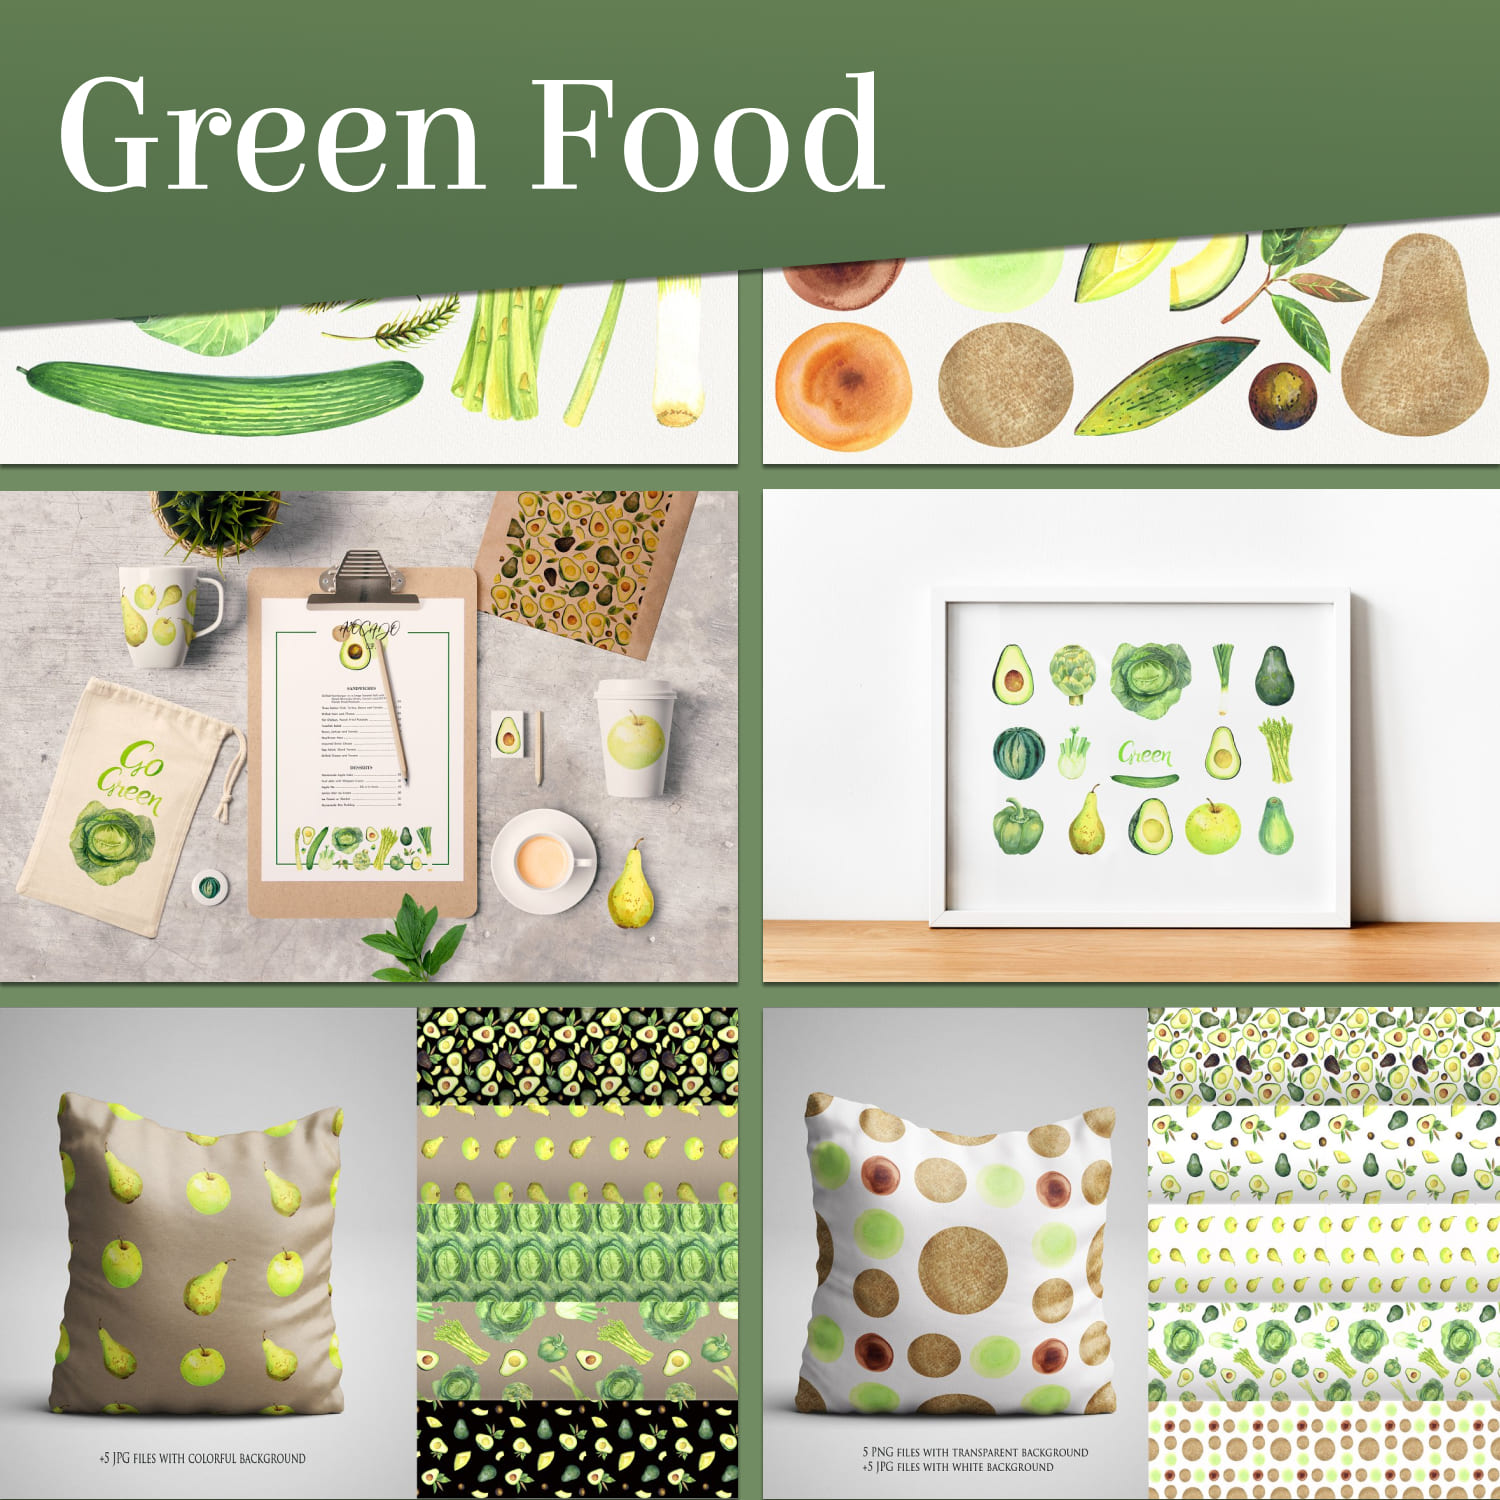 Green food - main image preview.